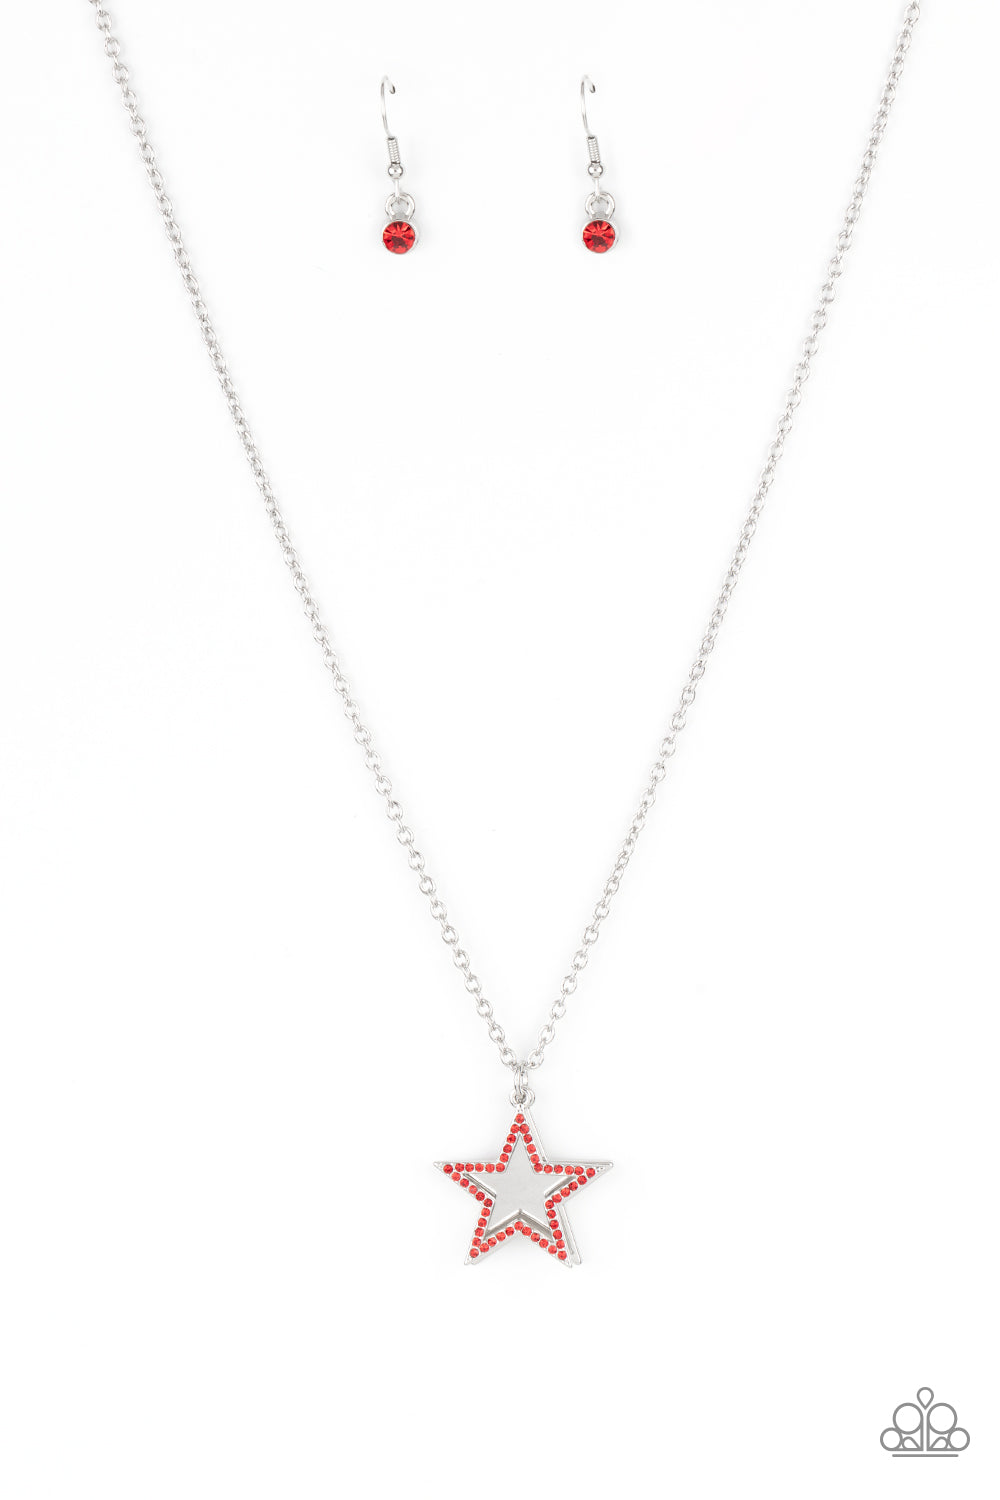 American Anthem Paparazzi Accessories Necklace with Earrings -Red